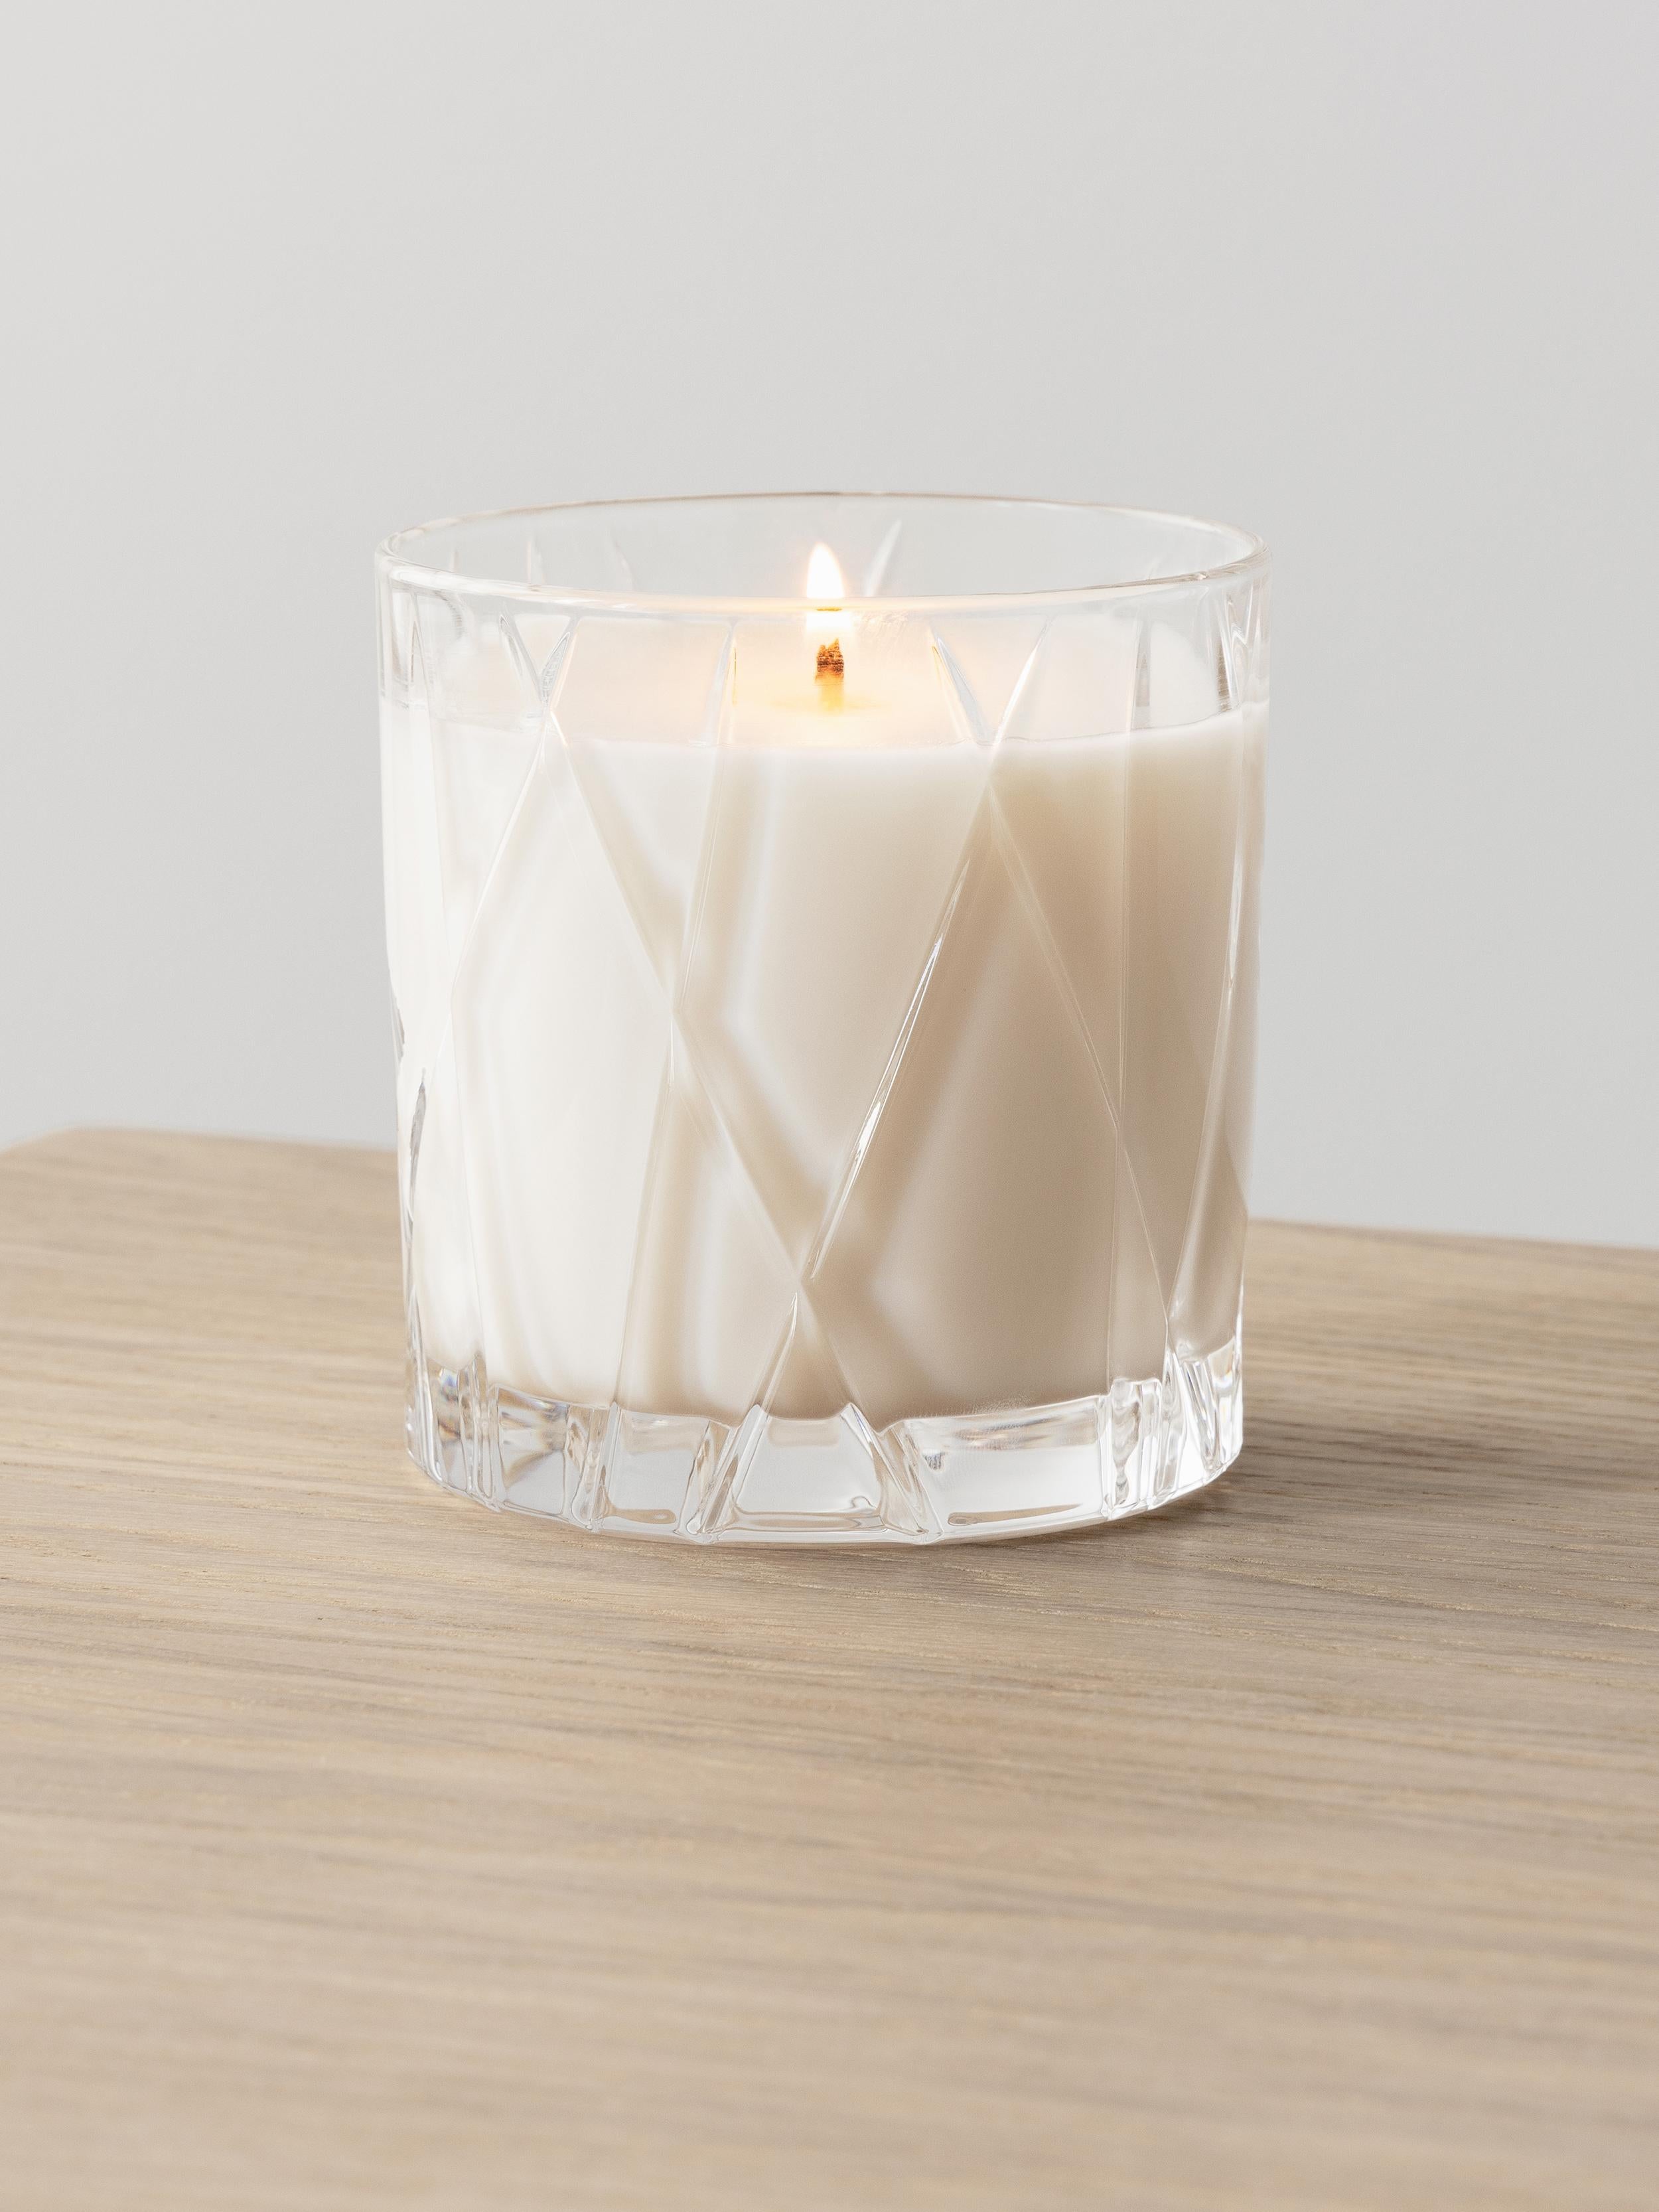 City Candle in the scent Warm Amber and Oakmoss is made with a high-quality formula. The wax is composed of a soy blend, and the burn time is approximately 50 hours. 
 
 City Candle has a versatile scent of peaceful and warm notes including Lemon